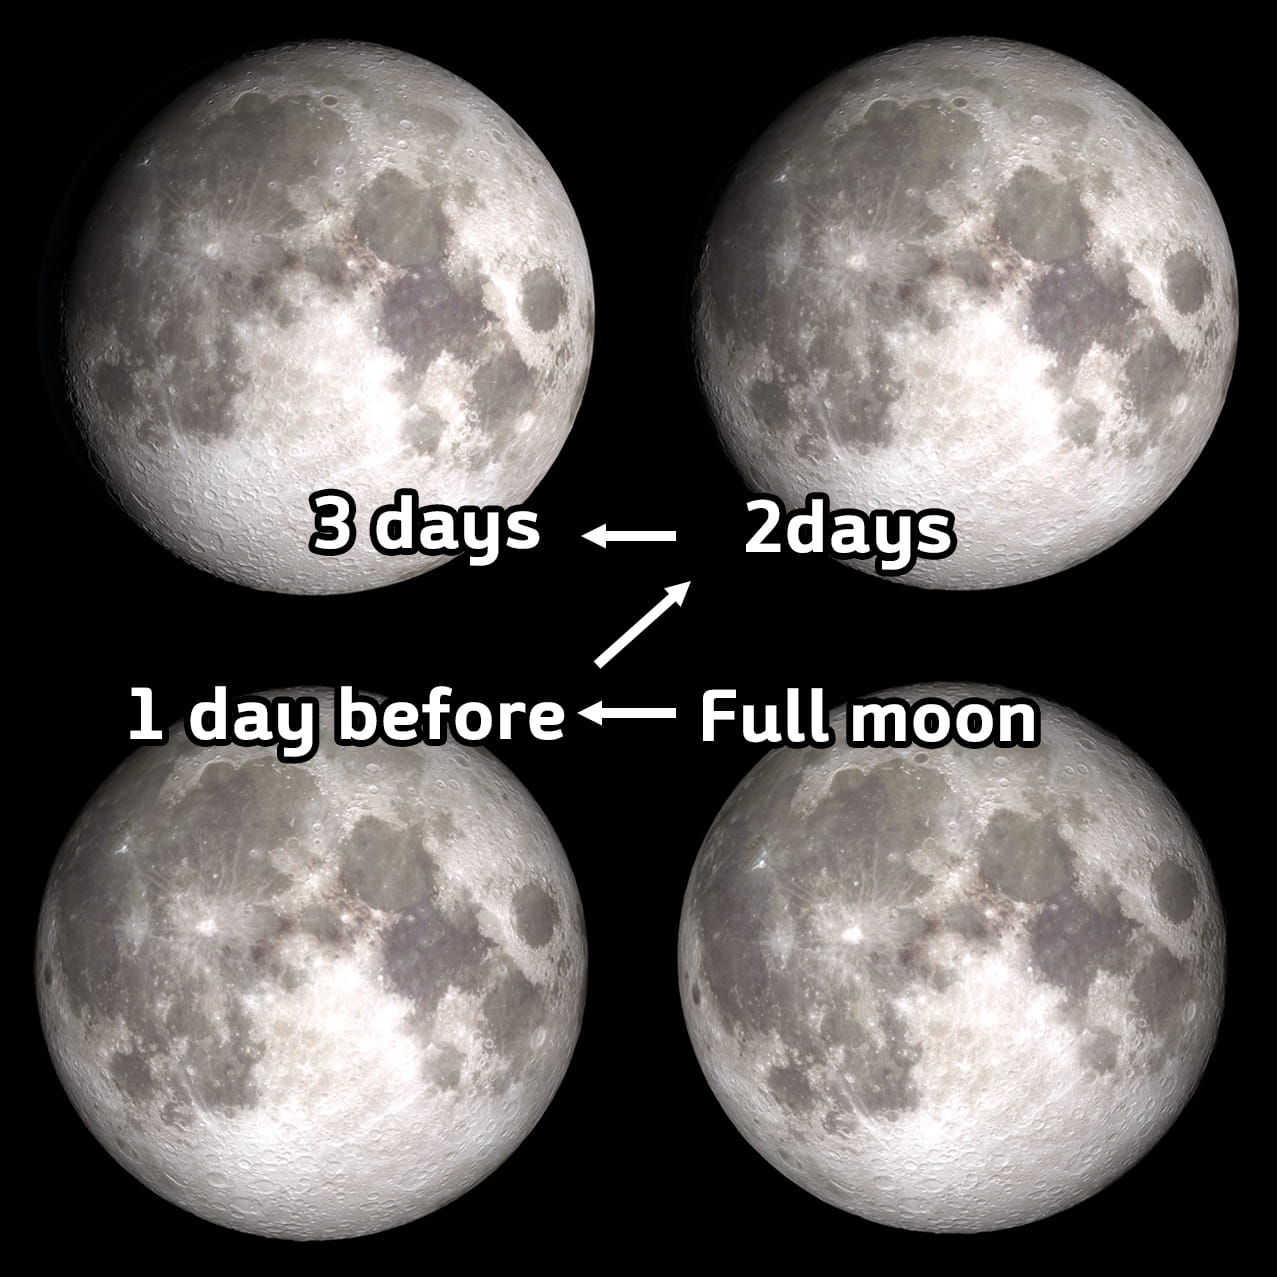 Moon phase before 3 days of the full moon